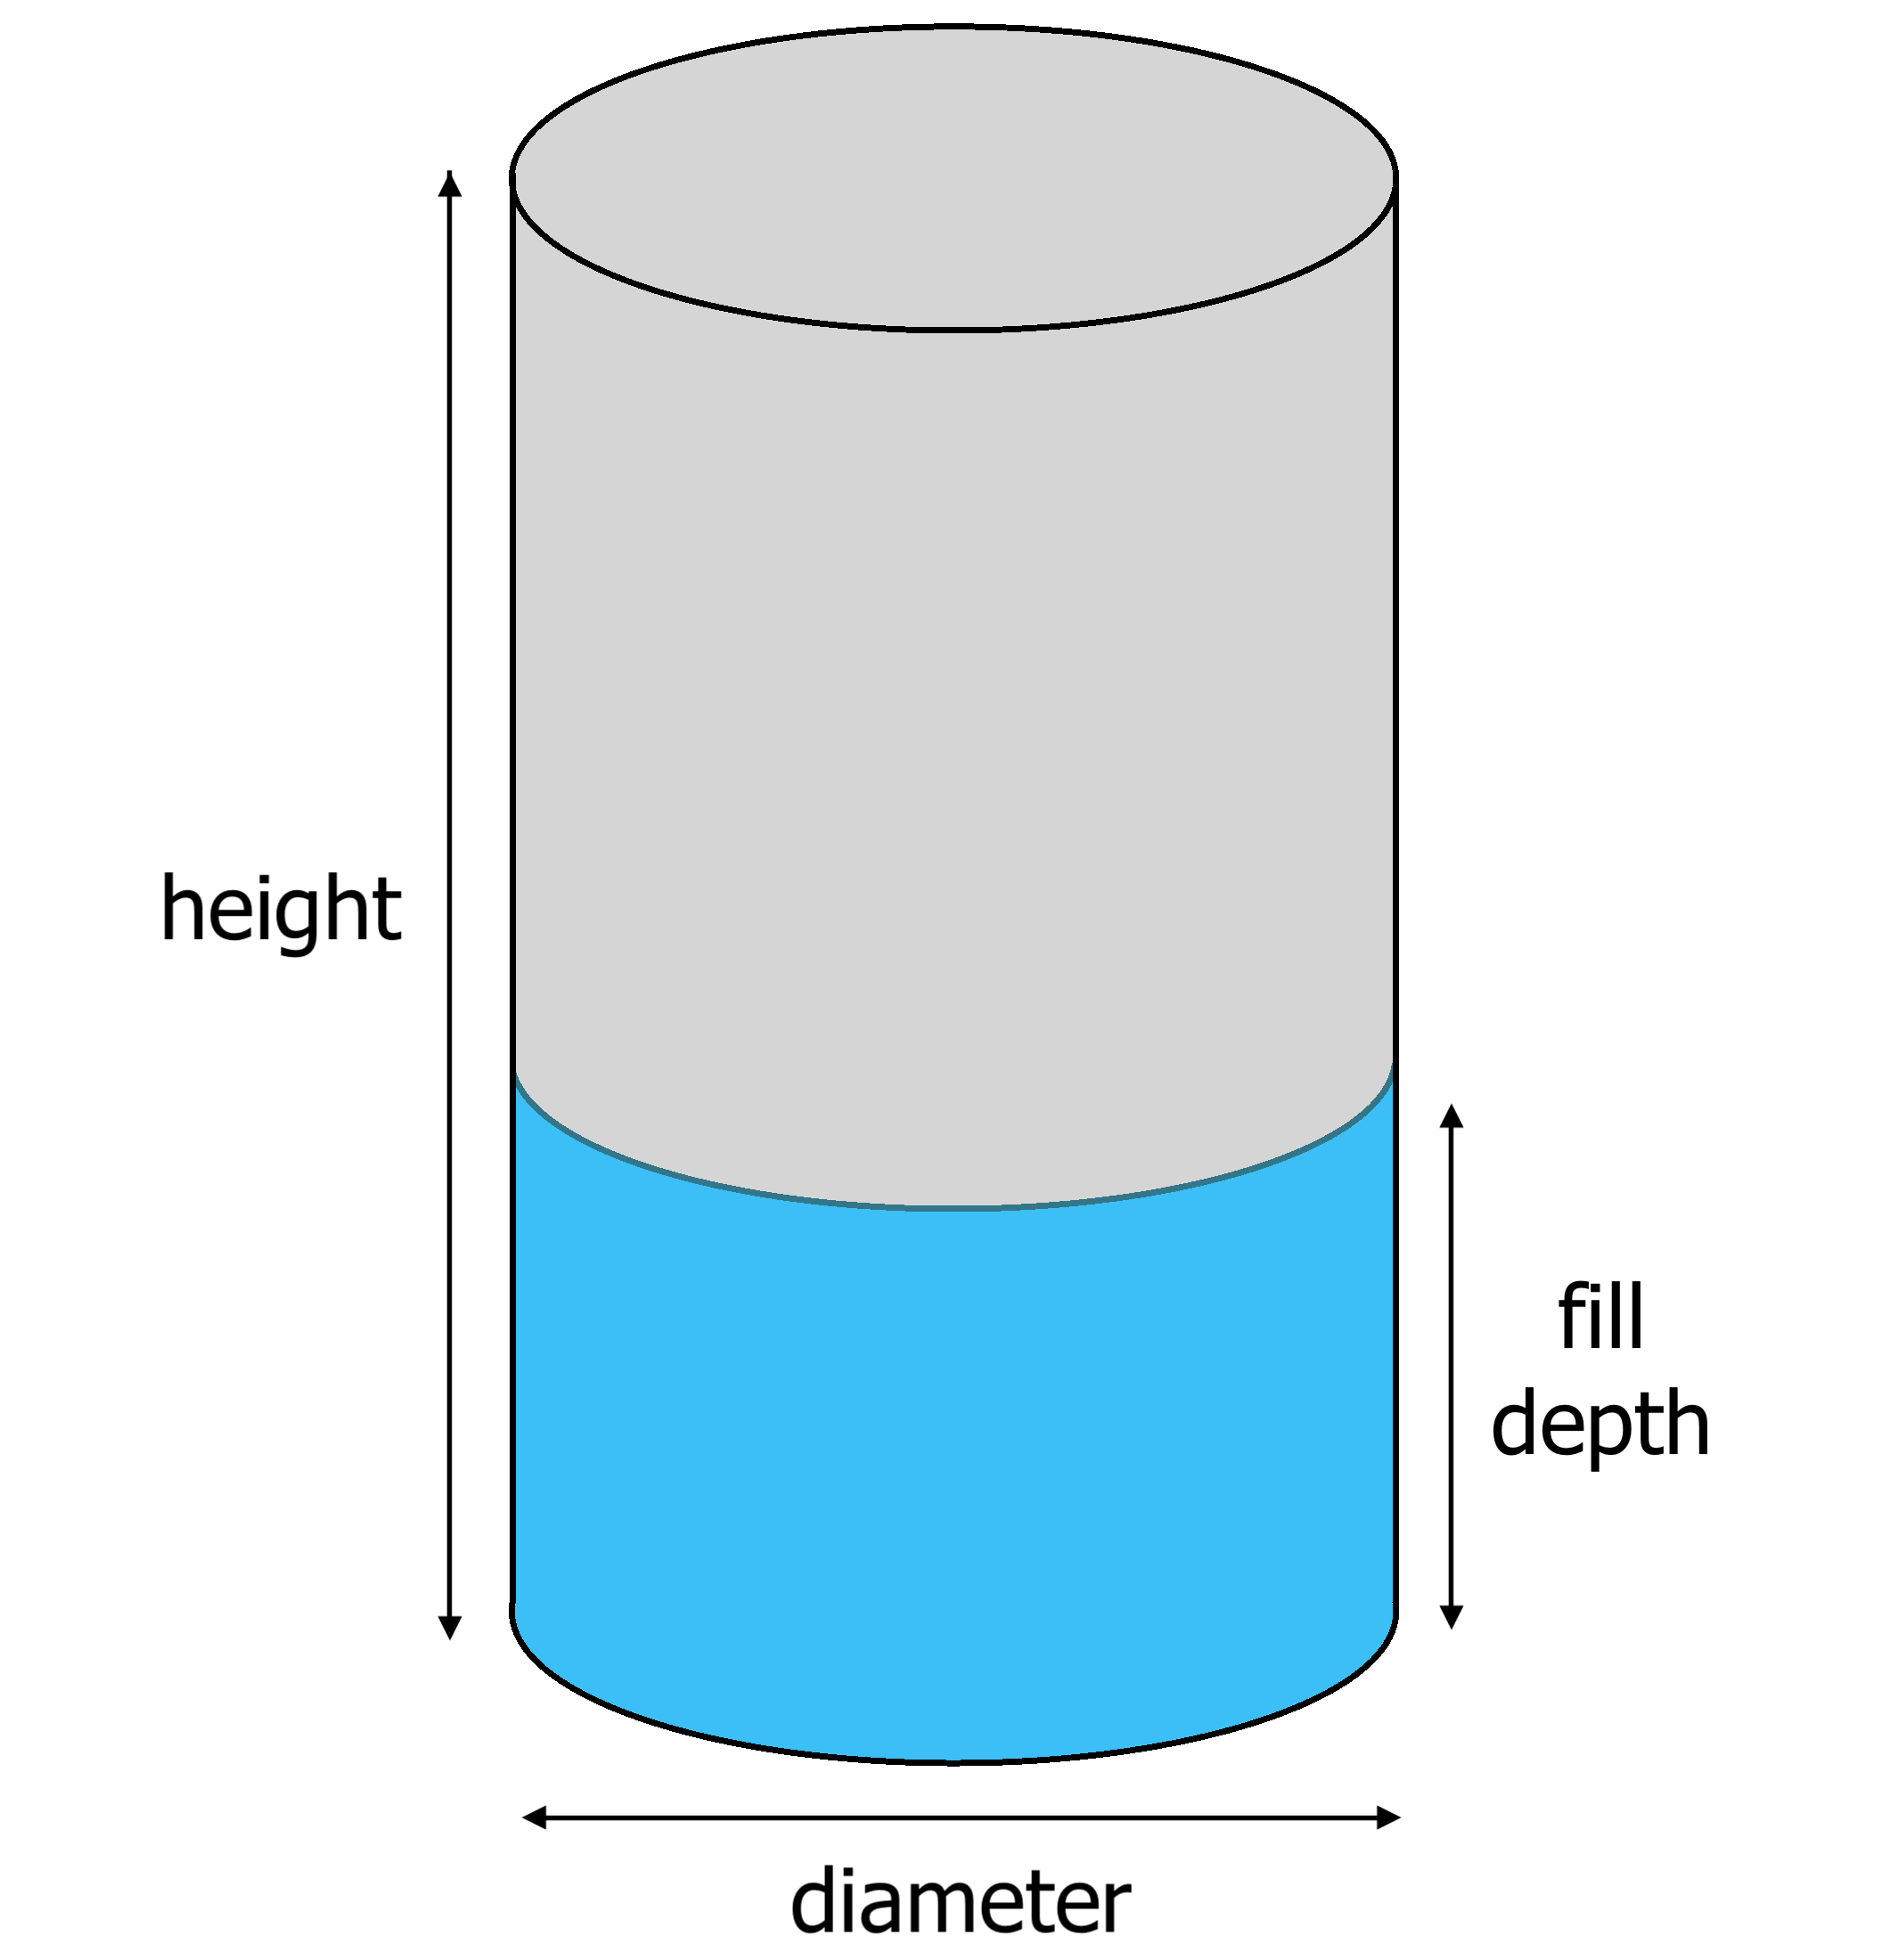 vertical cylinder tank diagram showing height, diameter, and fill depth dimensions